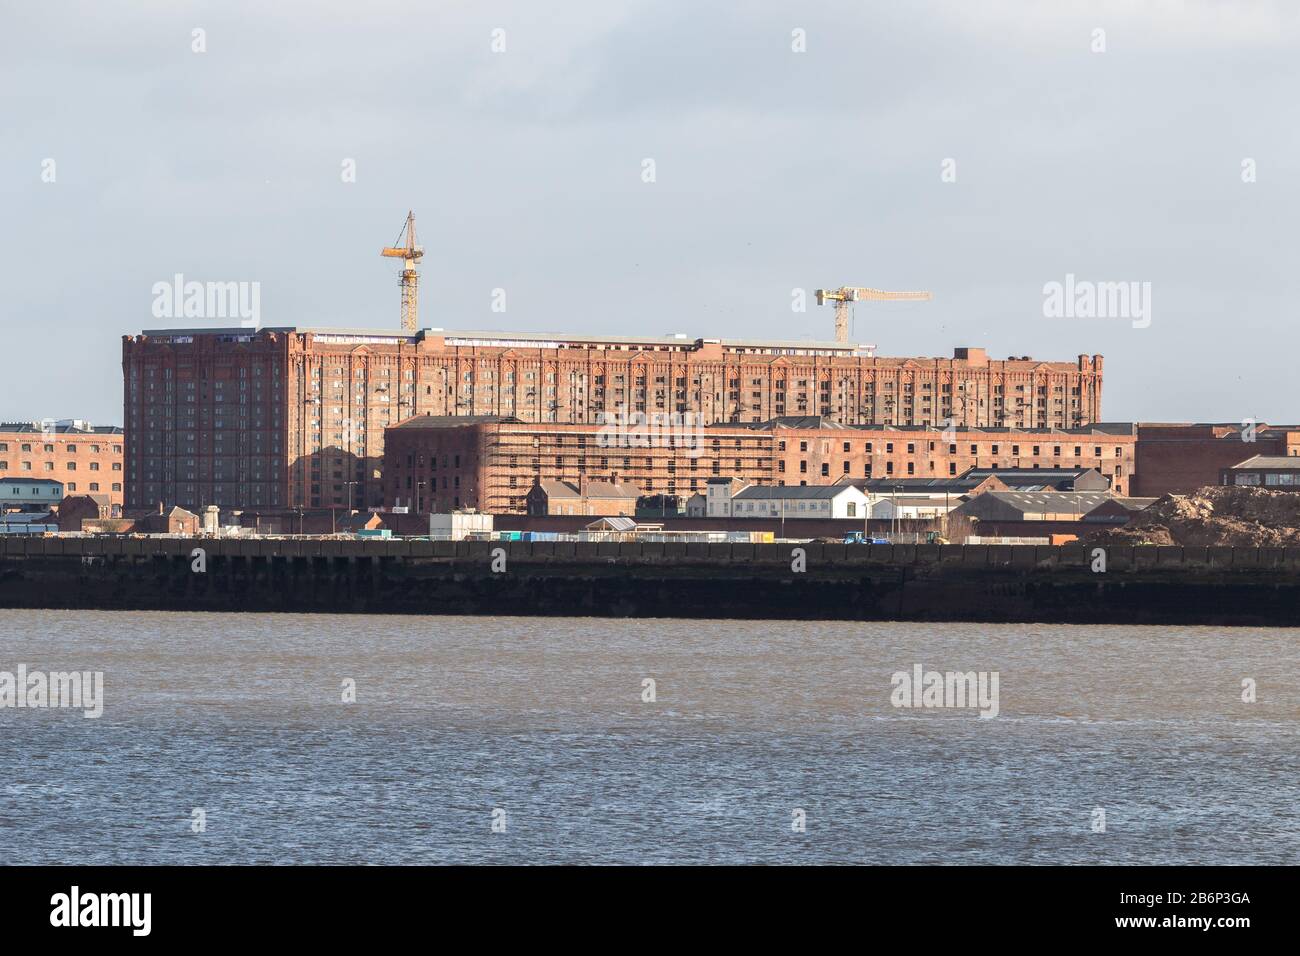 Stanley Dock Tobacco Warehouse, the world's largest brick warehouse, overlooking river Mersey, Liverpool Stock Photo